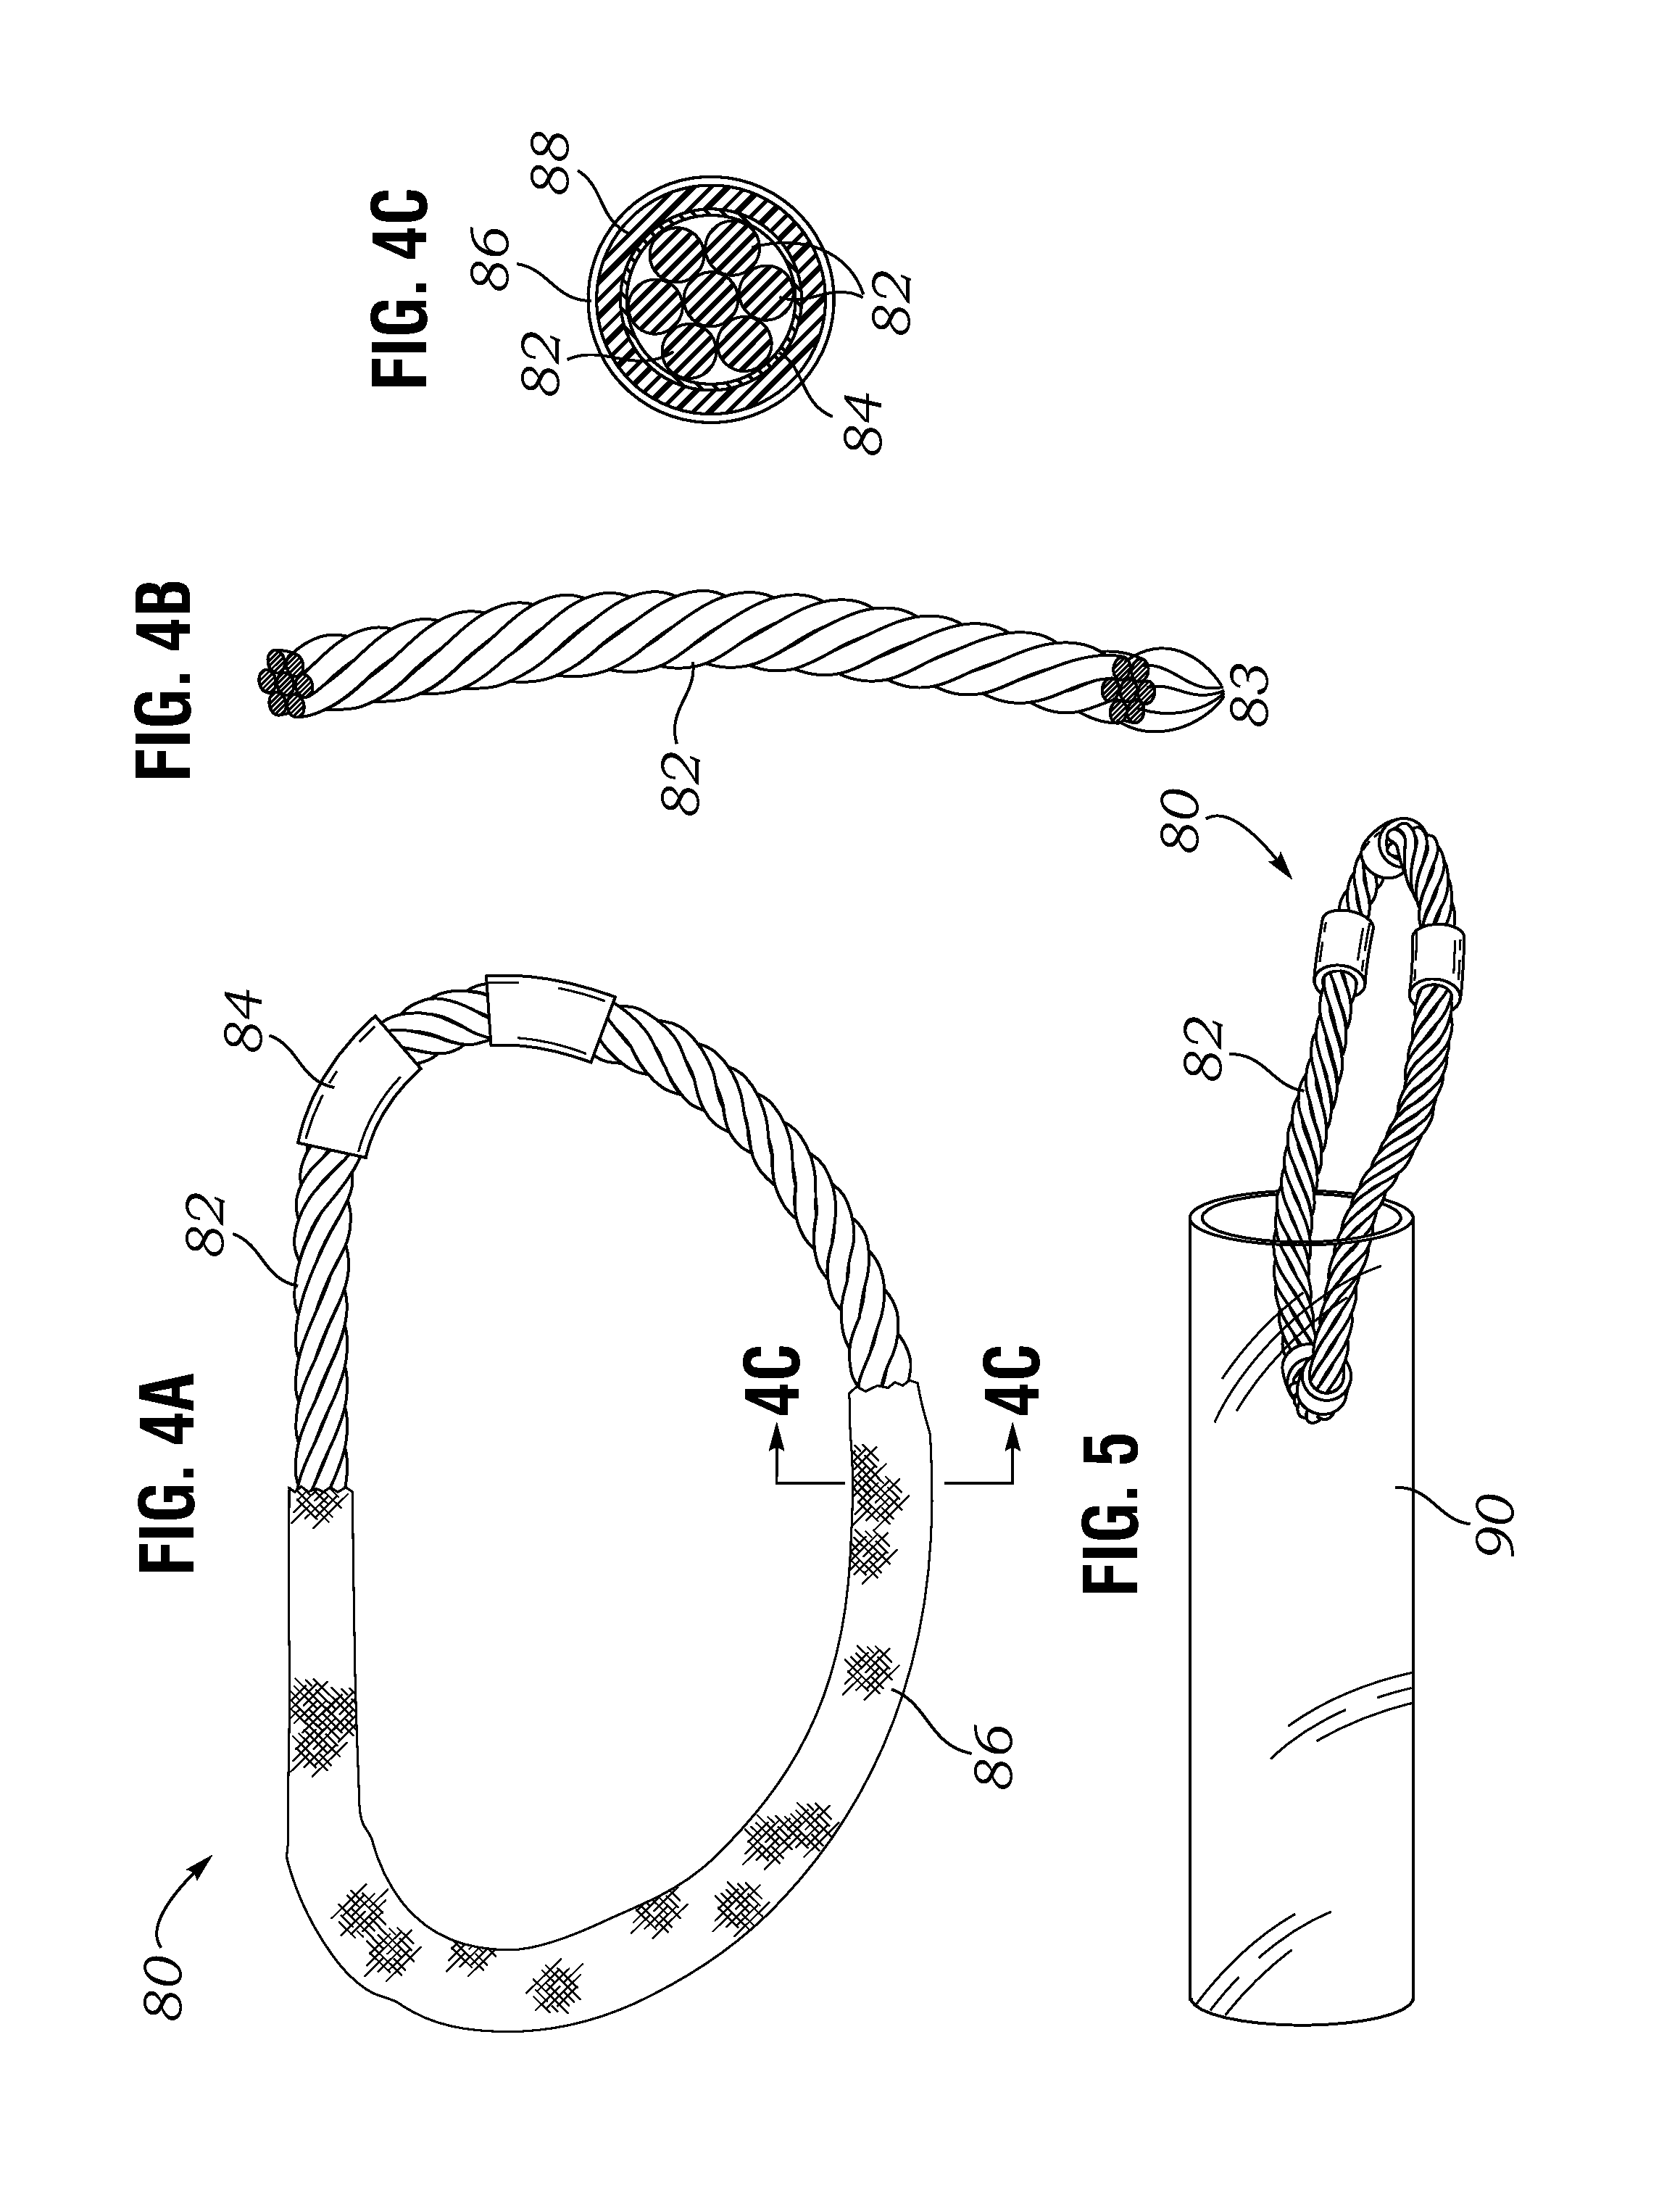 Flexible Annuloplasty Ring With Select Control Points